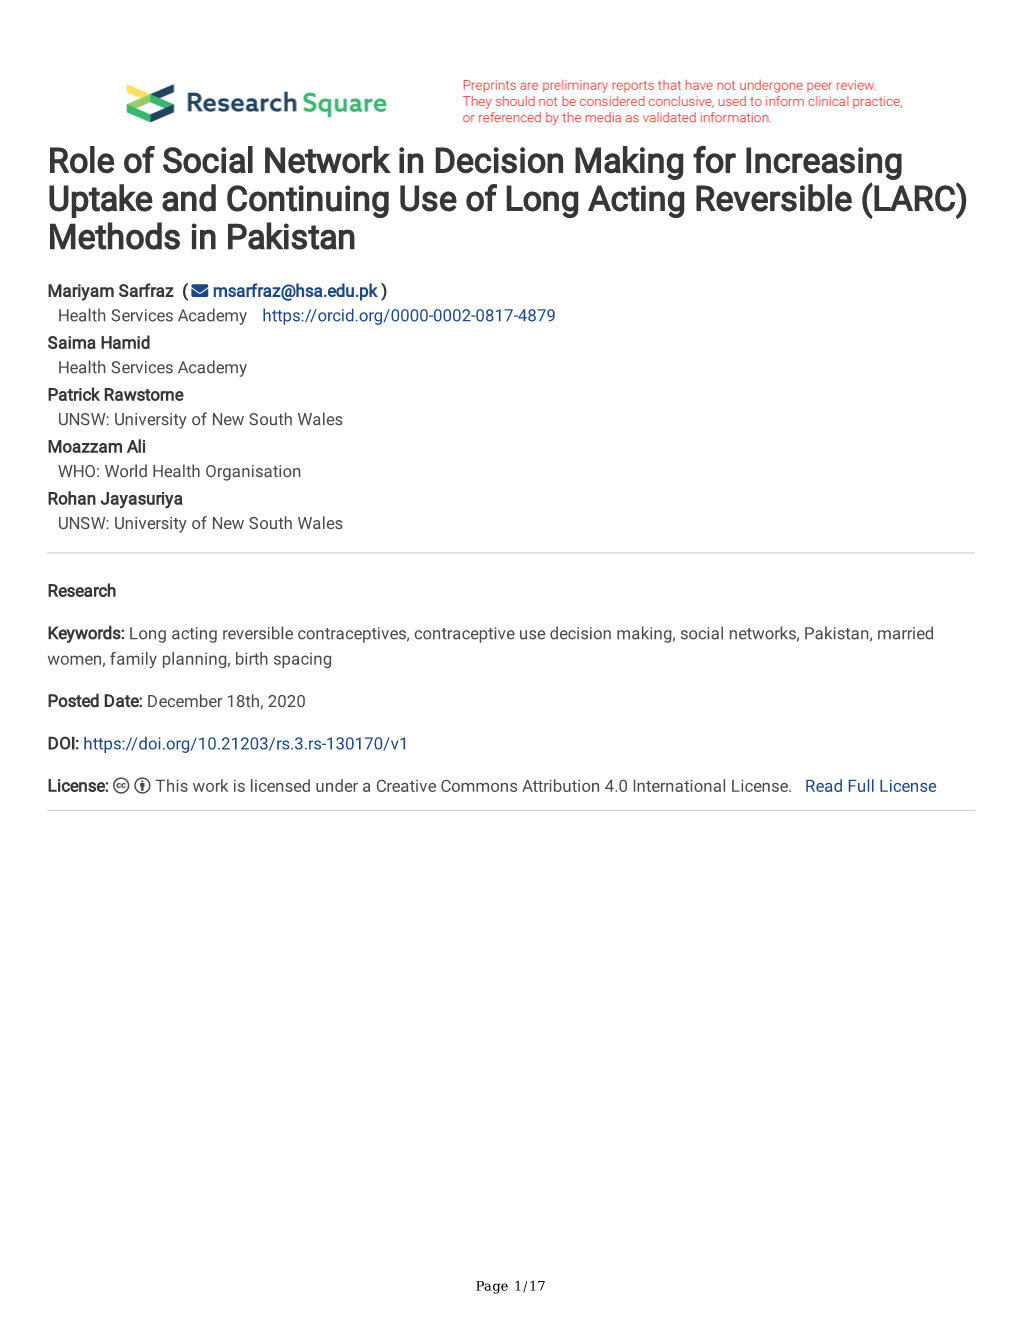 Role of Social Network in Decision Making for Increasing Uptake and Continuing Use of Long Acting Reversible (LARC) Methods in Pakistan